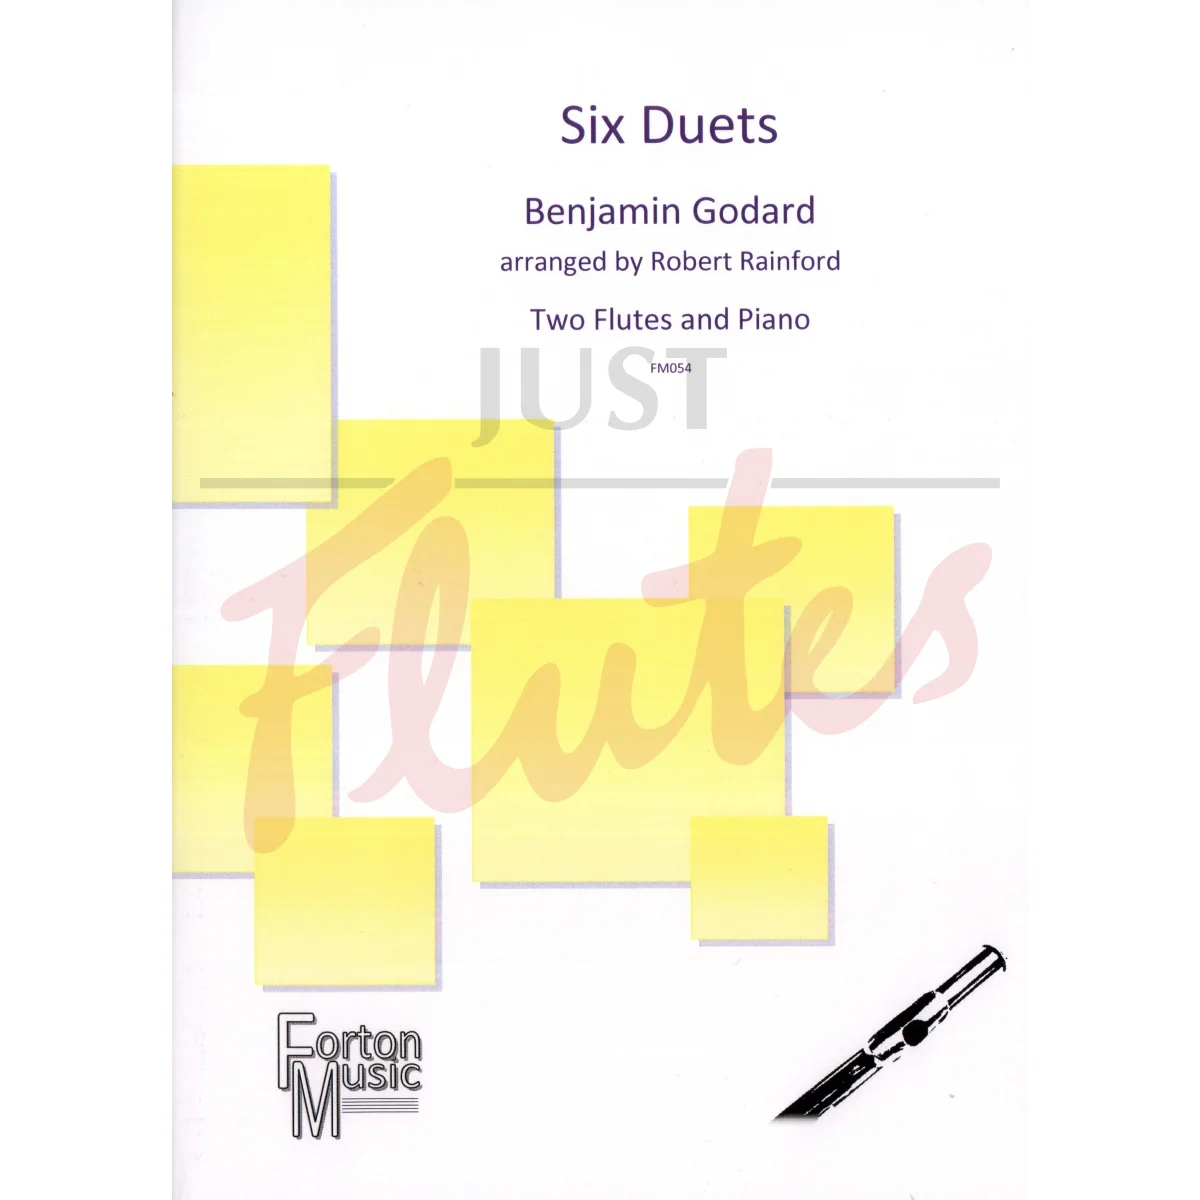 Six Duets arranged for Two Flutes and Piano